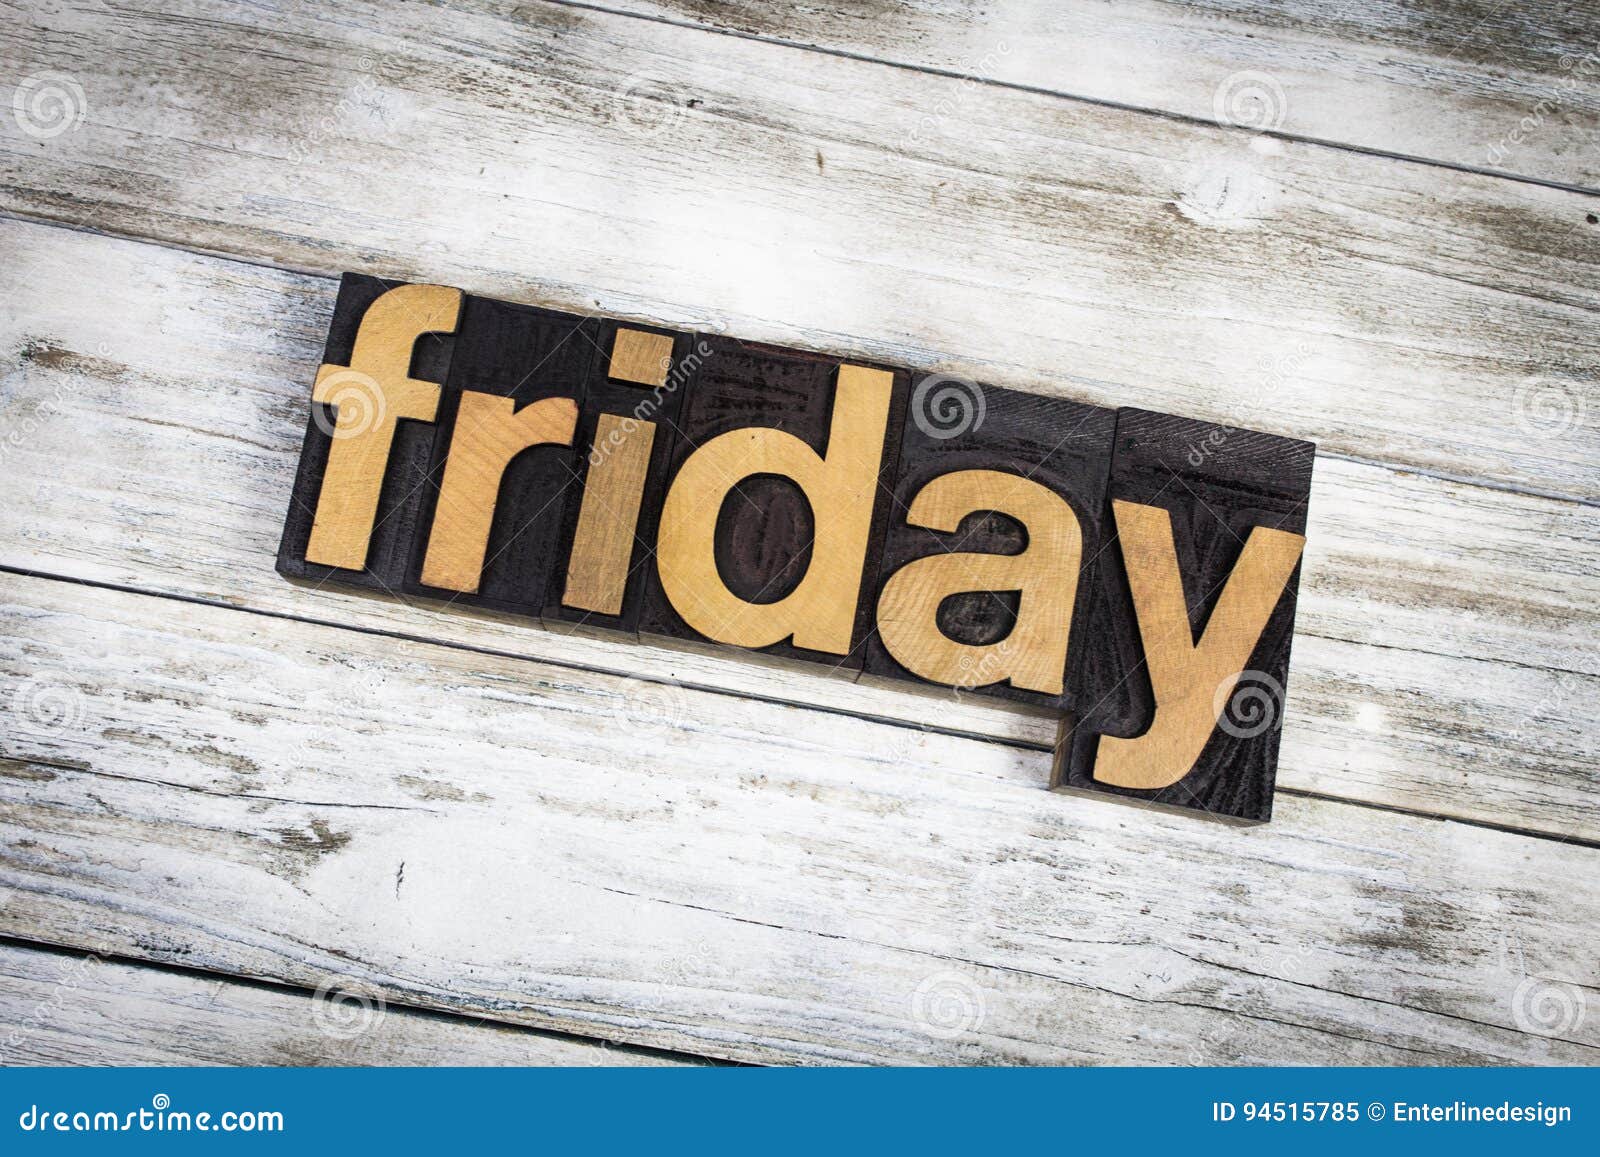 Friday Letterpress Word on Wooden Background Stock Image - Image of ...